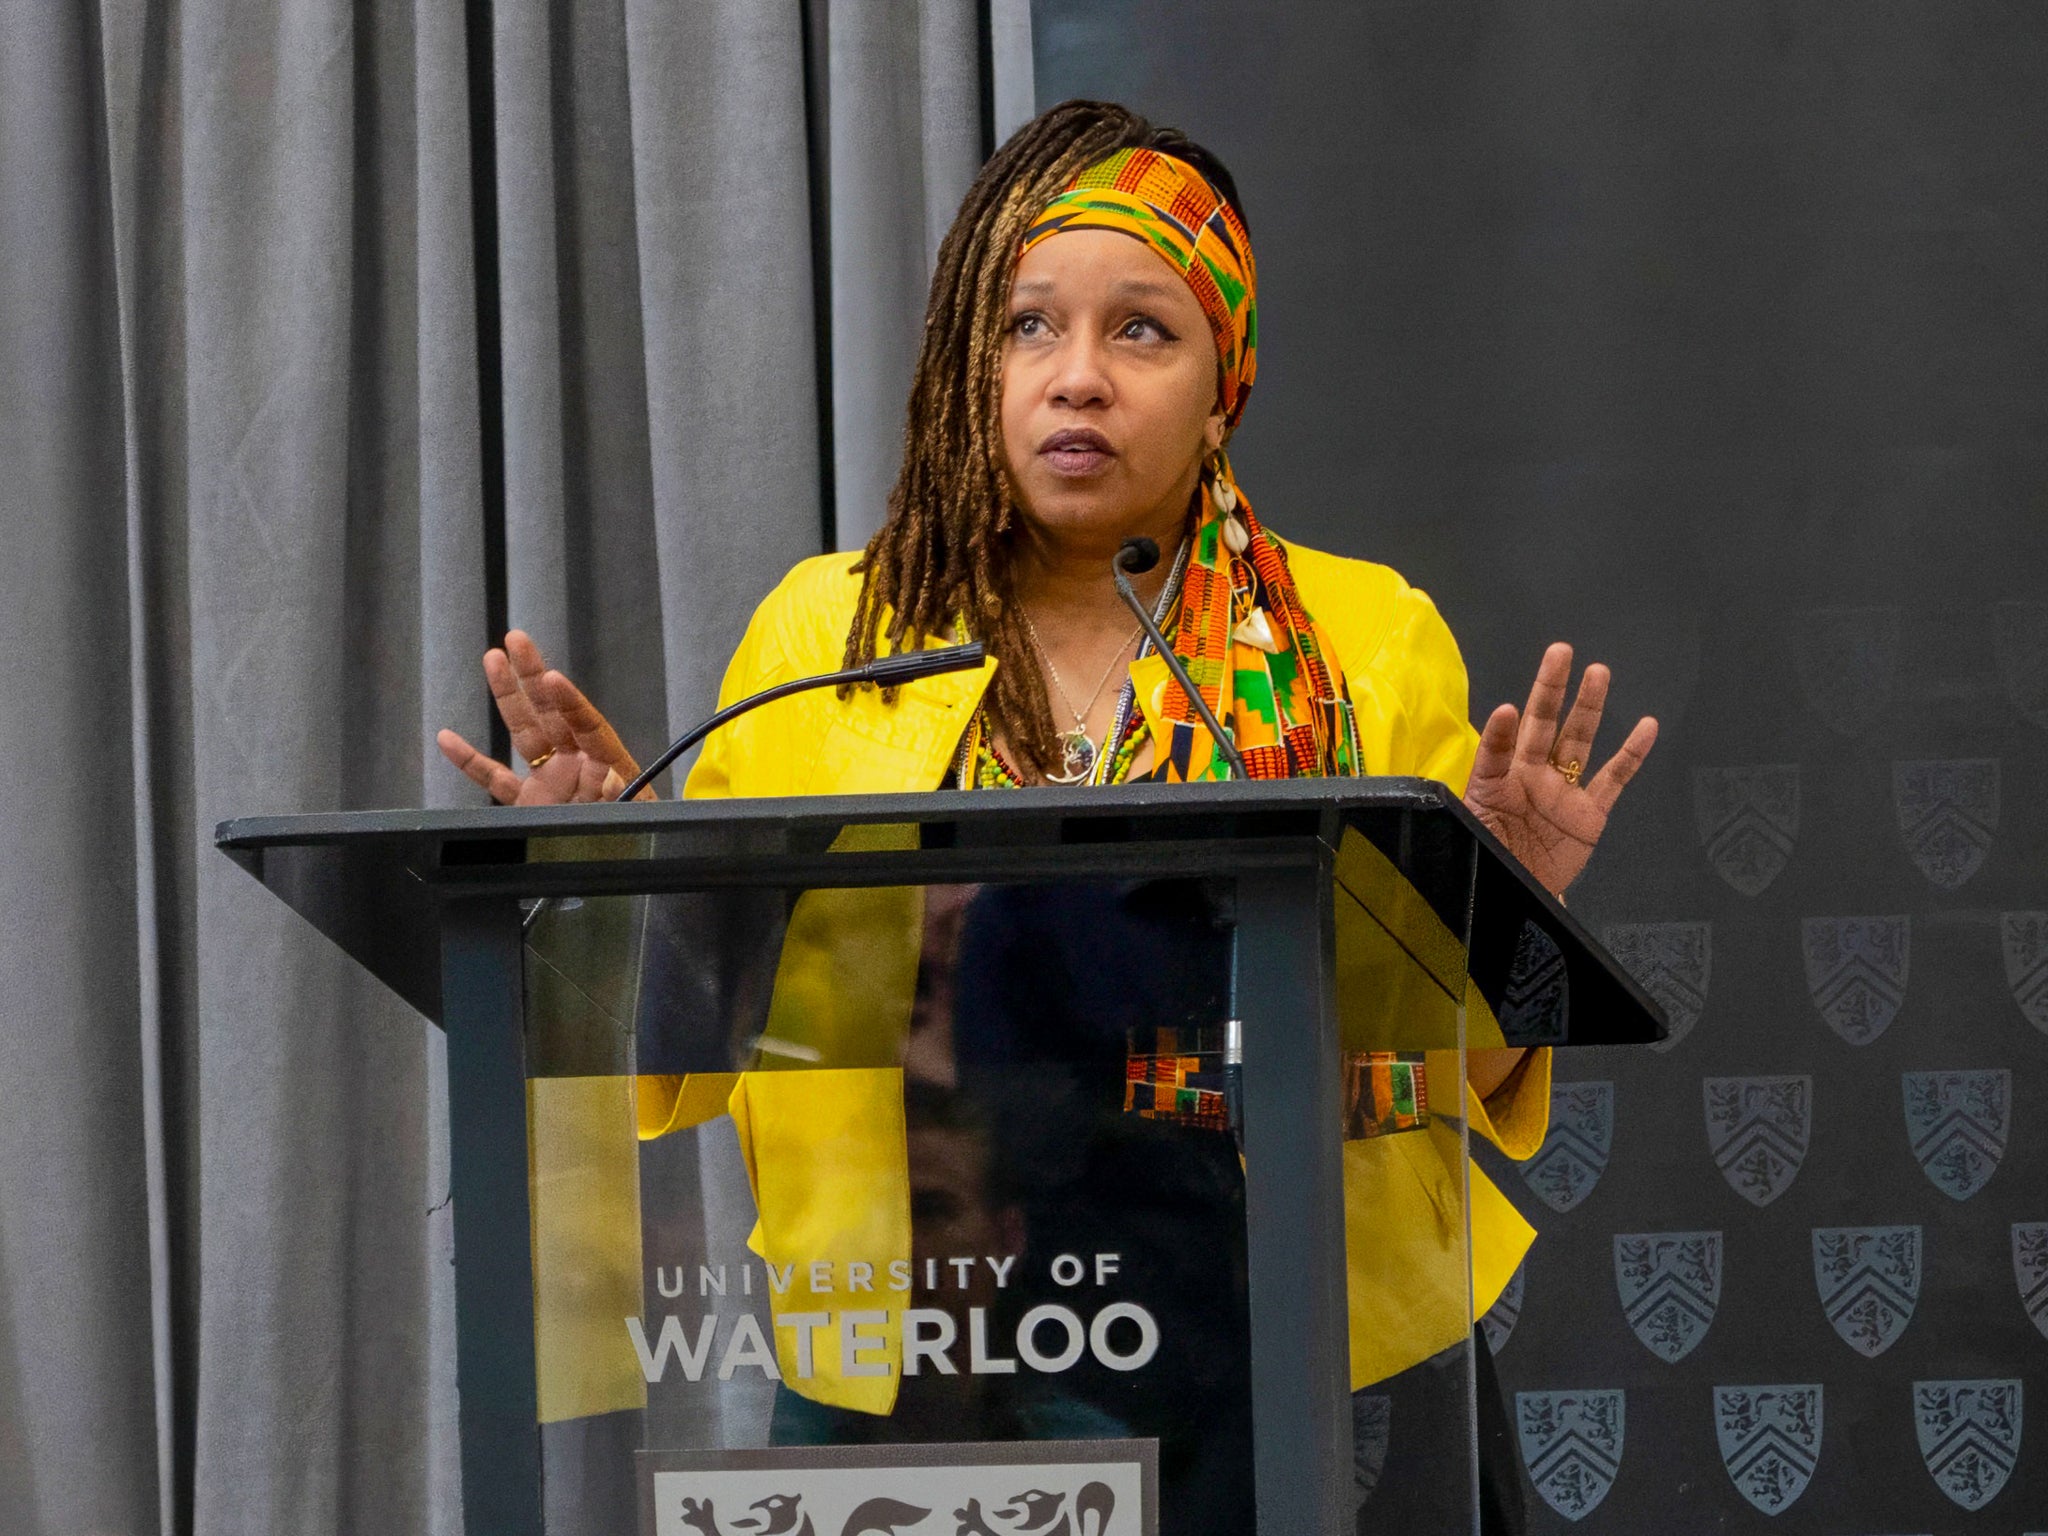 Dr. Laura Mae Lindo speaking at a podium inside Hagey Hall Hub with a University of Waterloo banner behind her